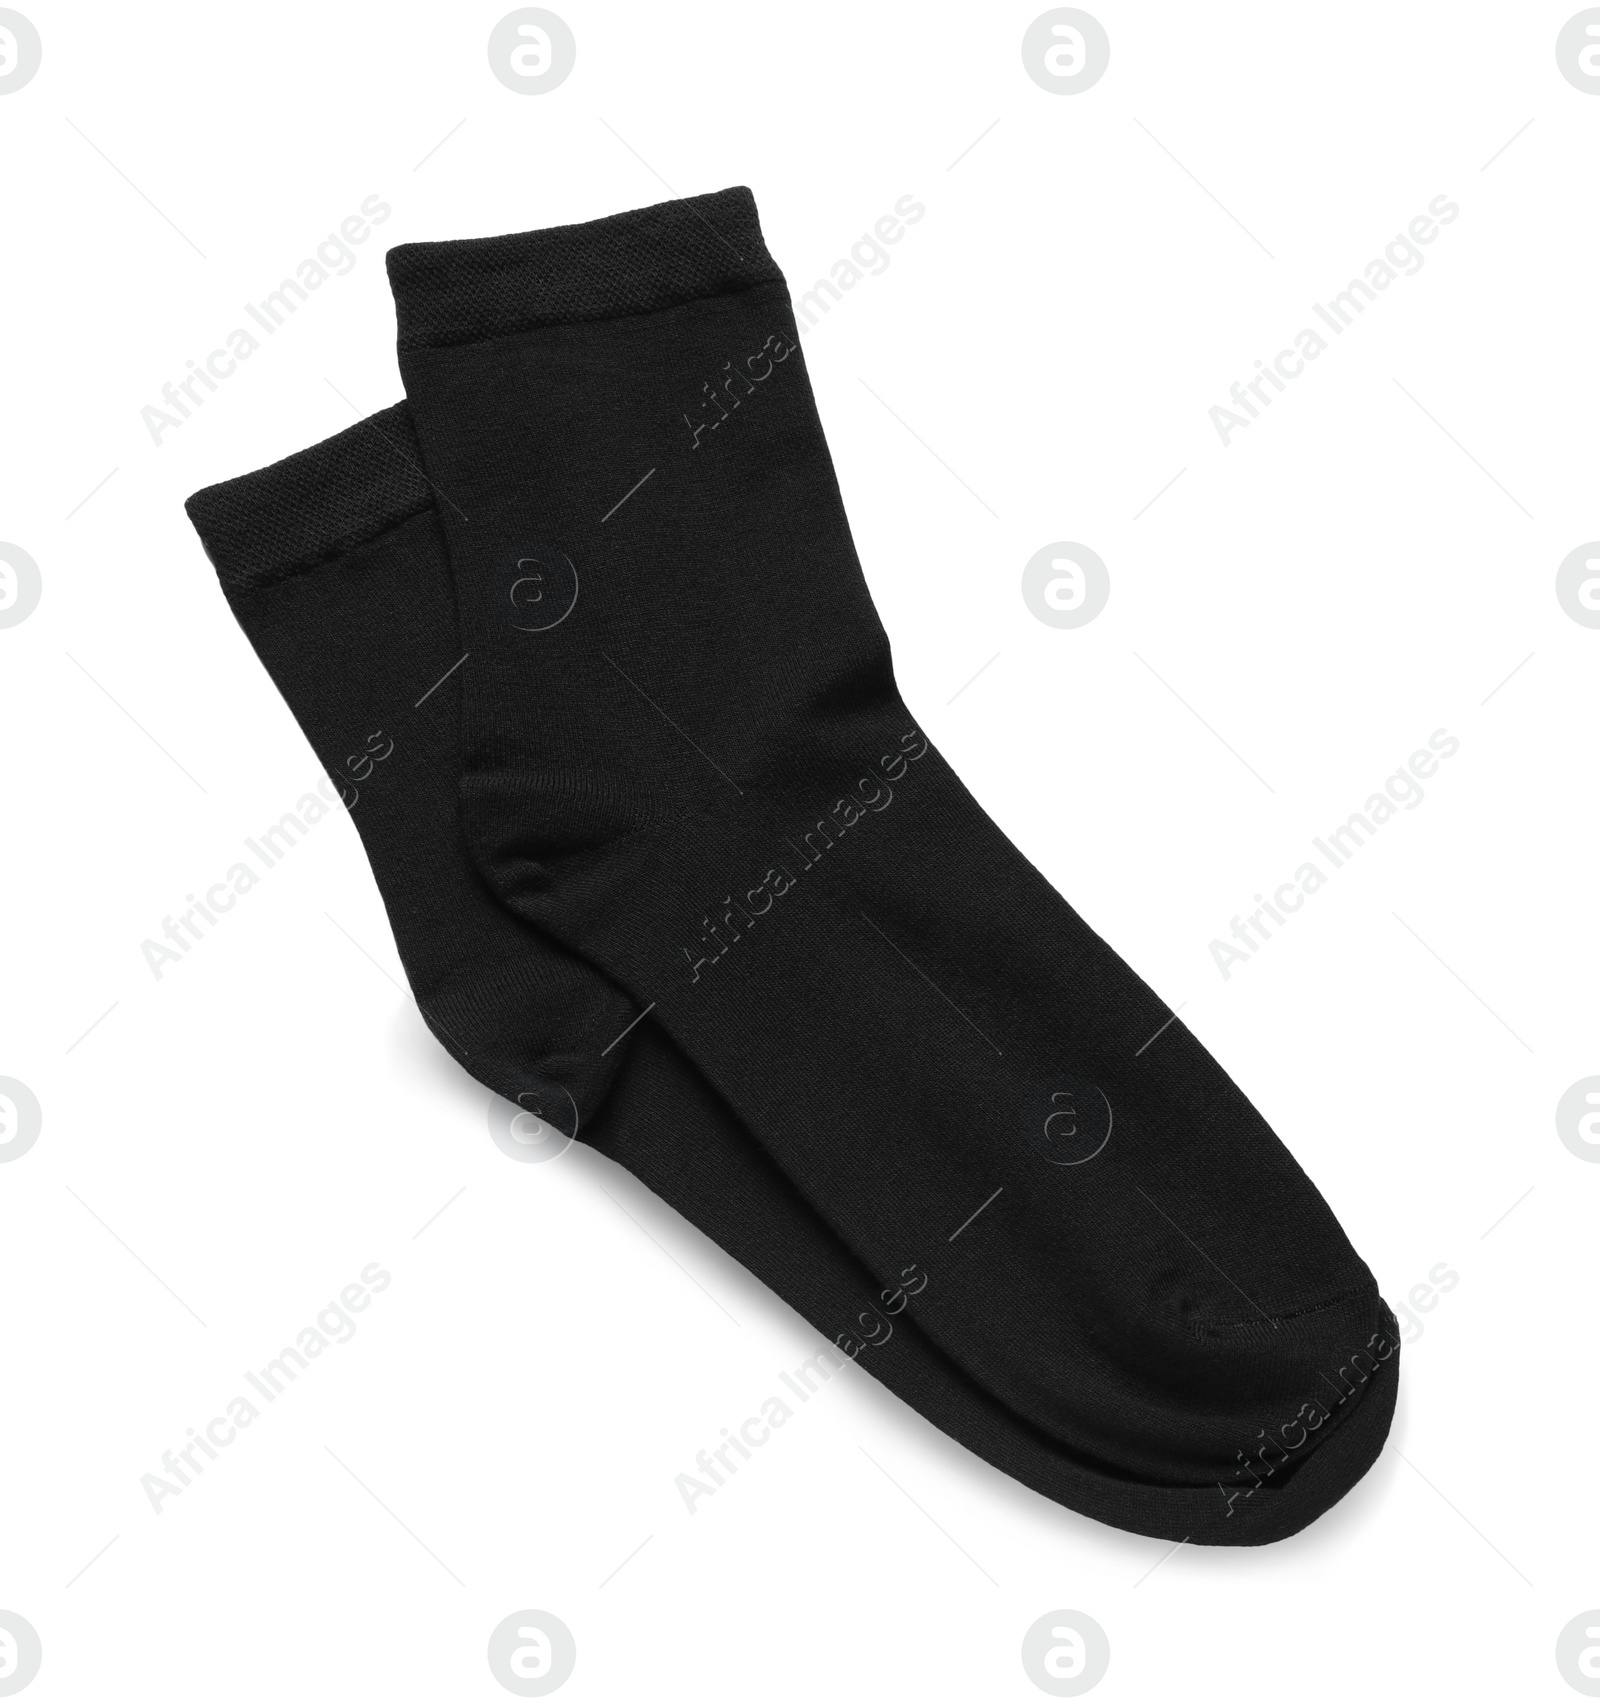 Photo of Pair of black socks isolated on white, top view